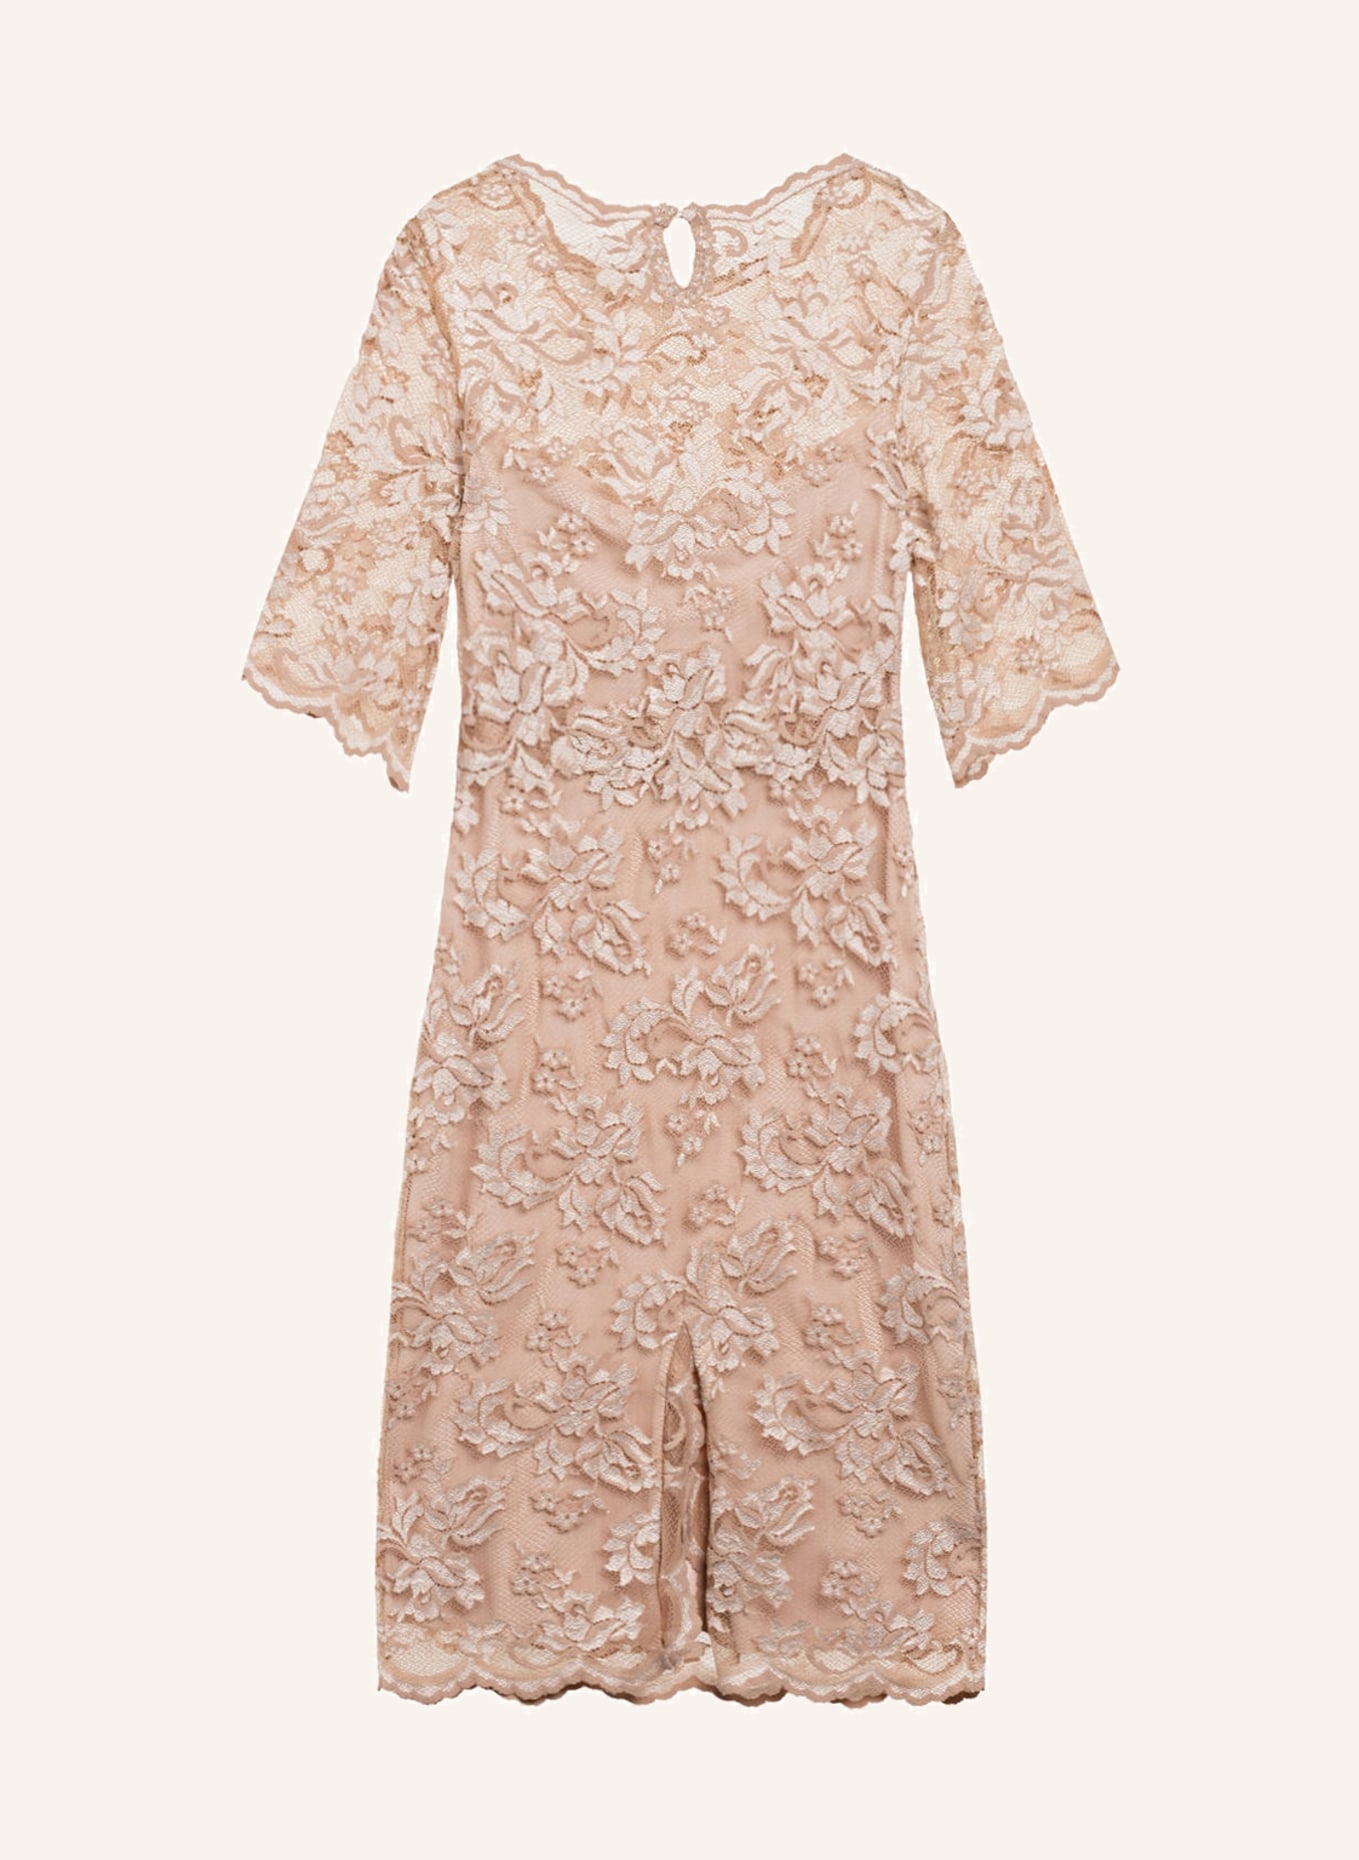 OLVI'S Lace dress with 3/4 sleeve, Color: NUDE (Image 2)